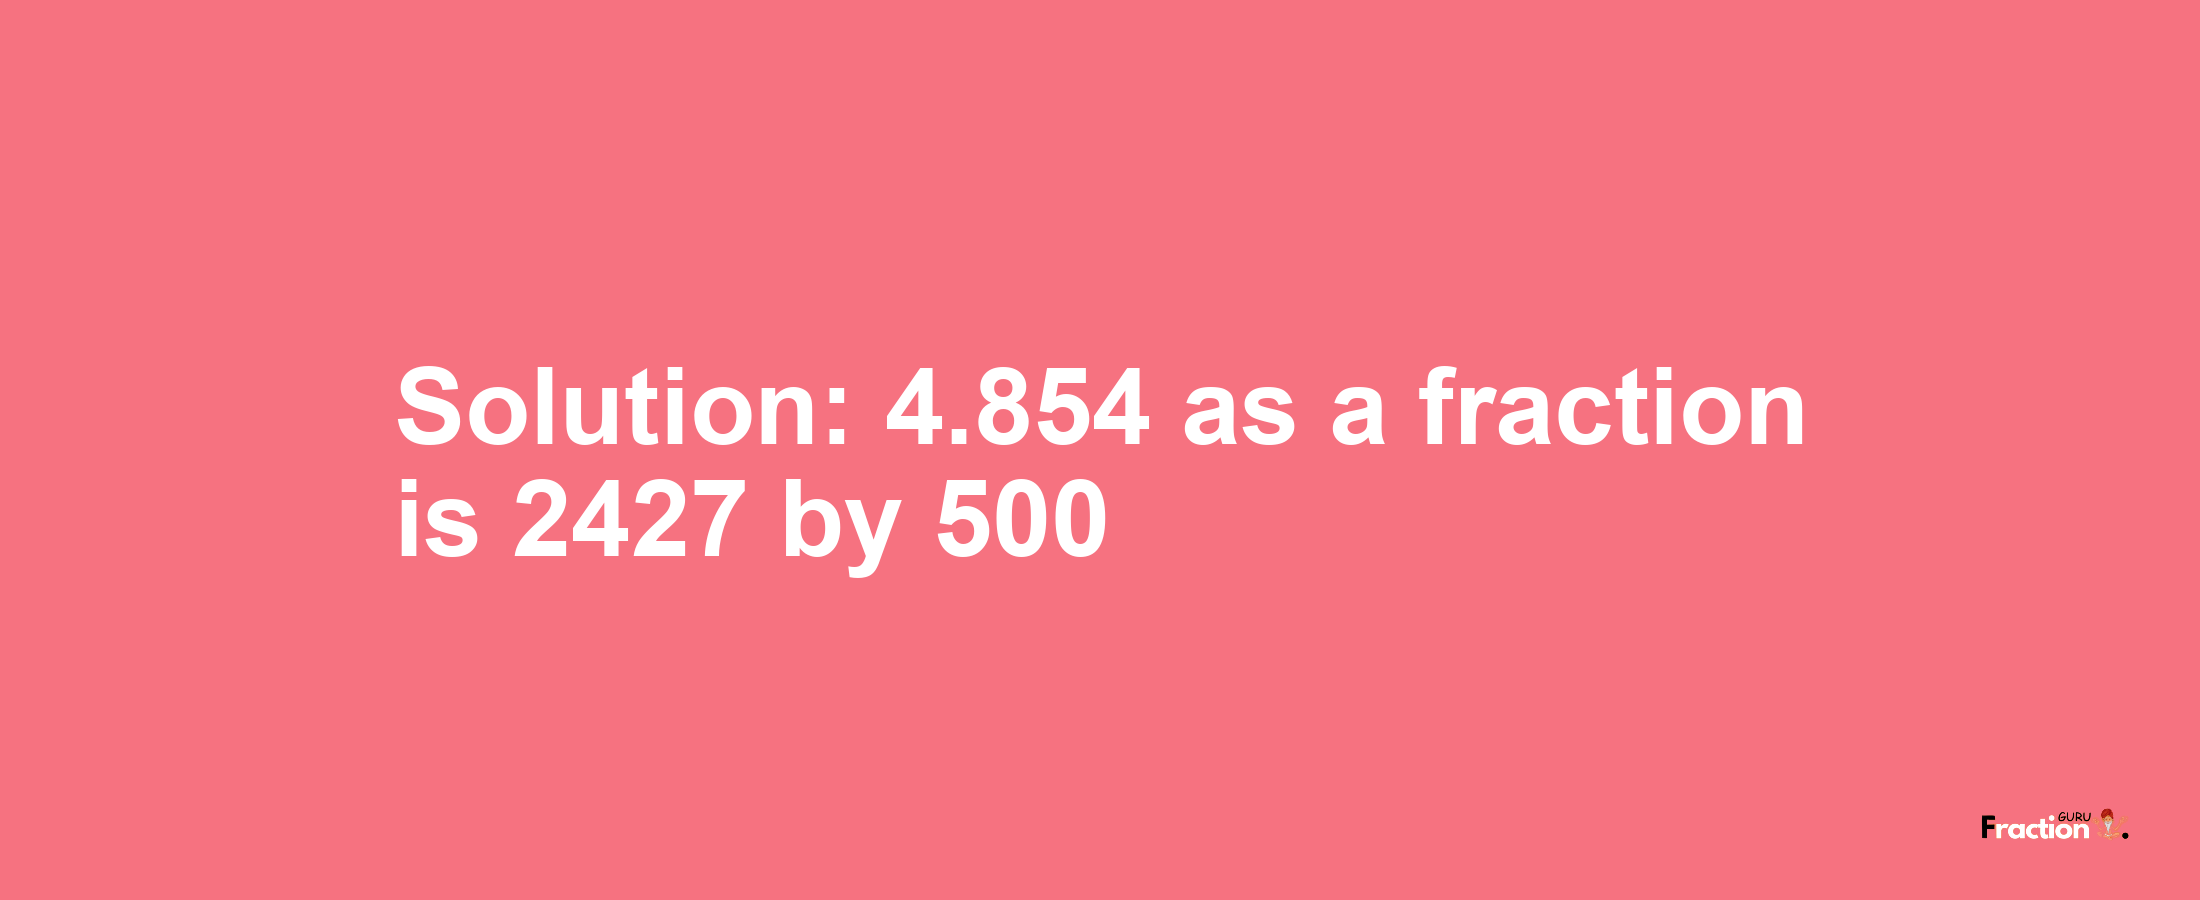 Solution:4.854 as a fraction is 2427/500